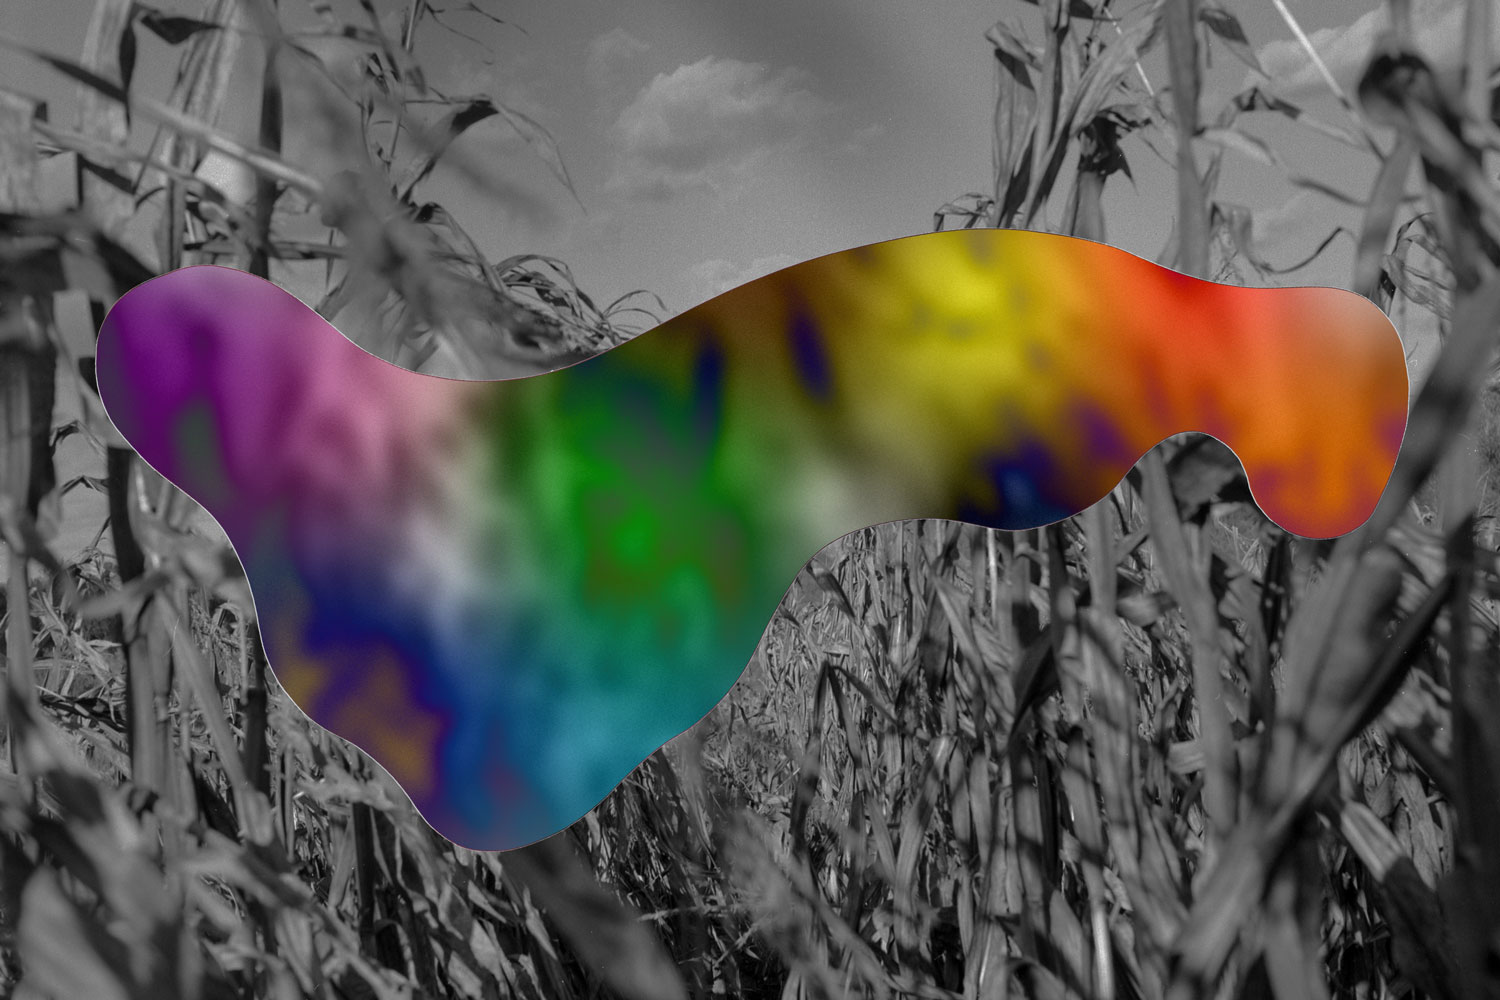 Image: A collage of a black and white photograph of a cornfield with an organic shaped rainbow form in the center. Image by Ryan Edmund Thiel.